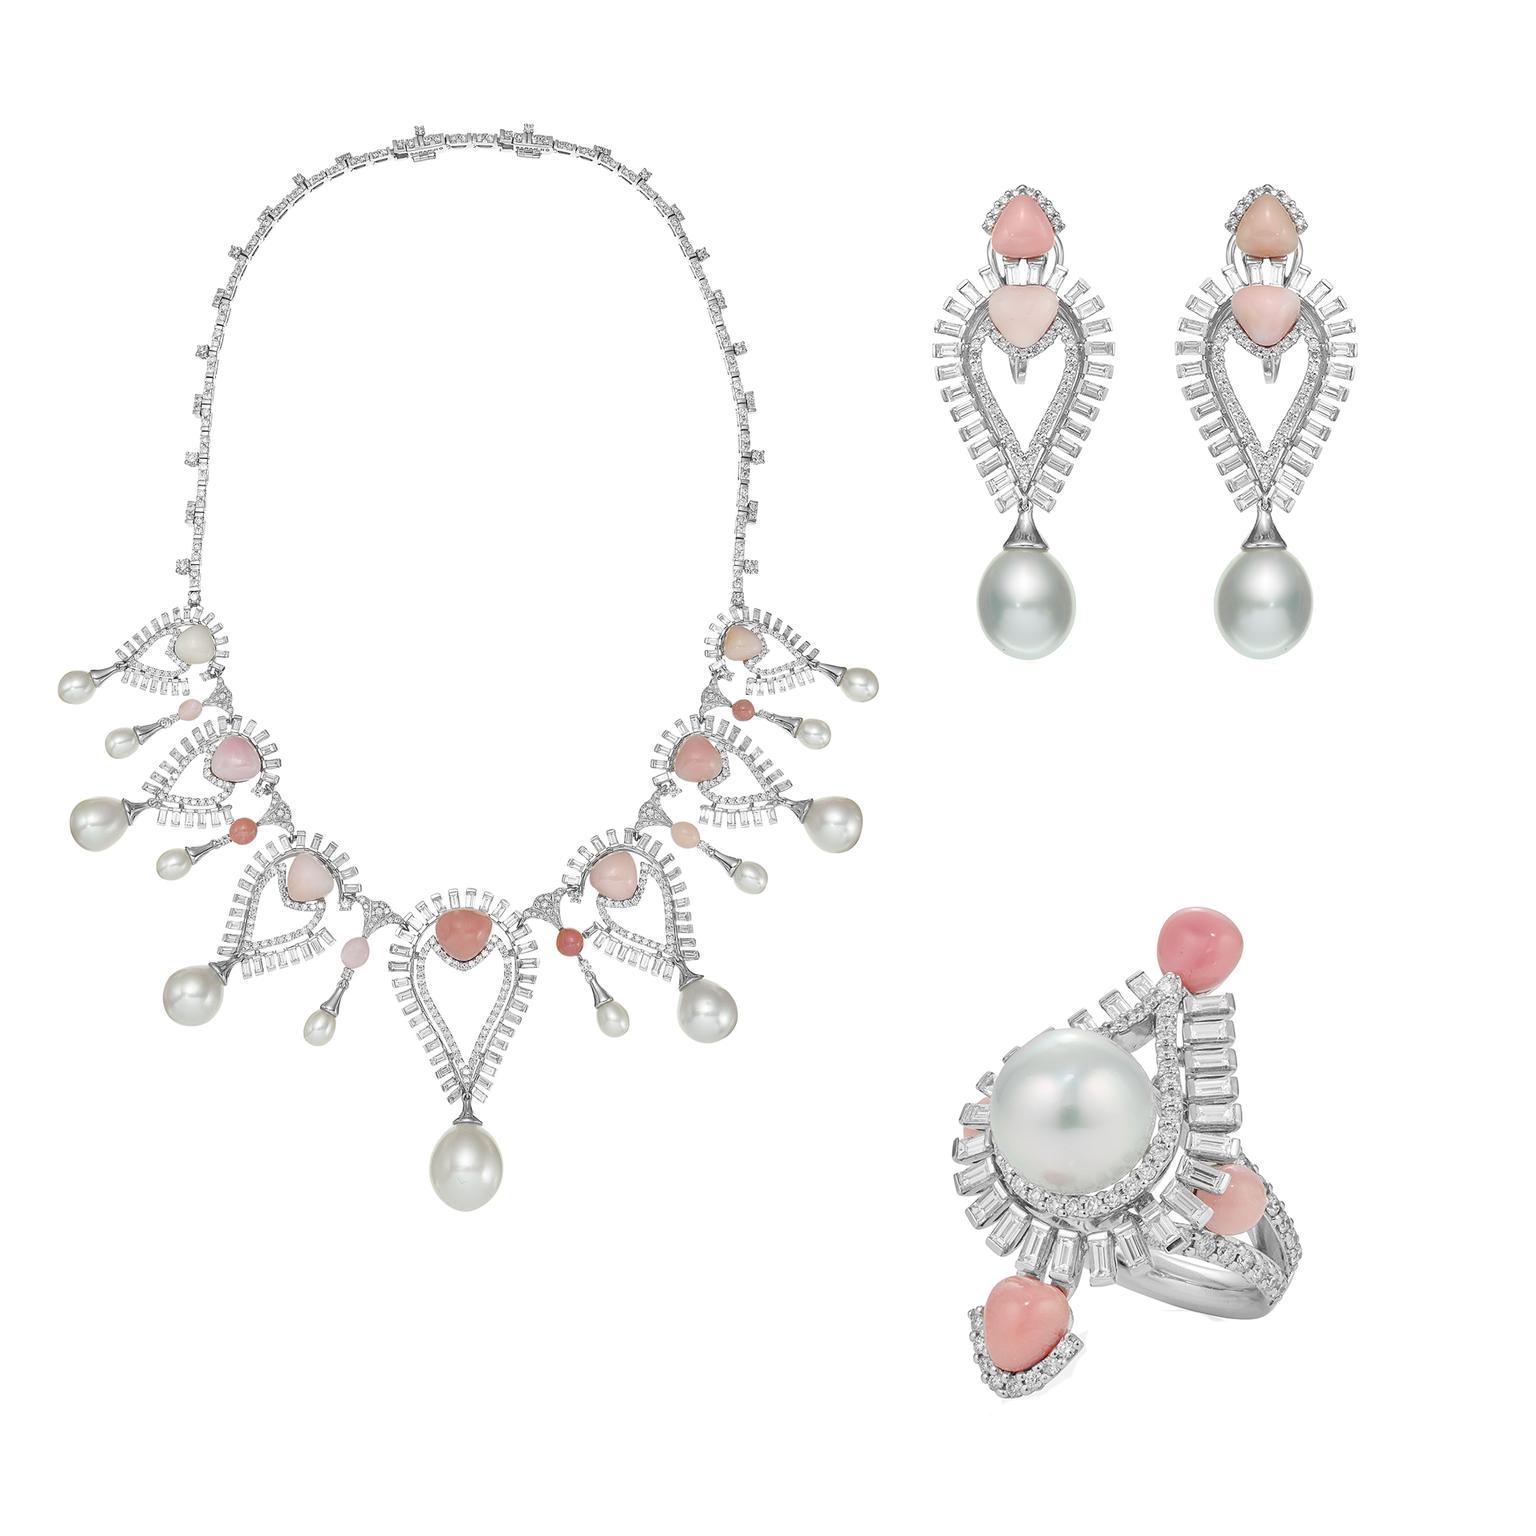 Sarah Ho Persica conch pearl necklace, earrings and ring suite